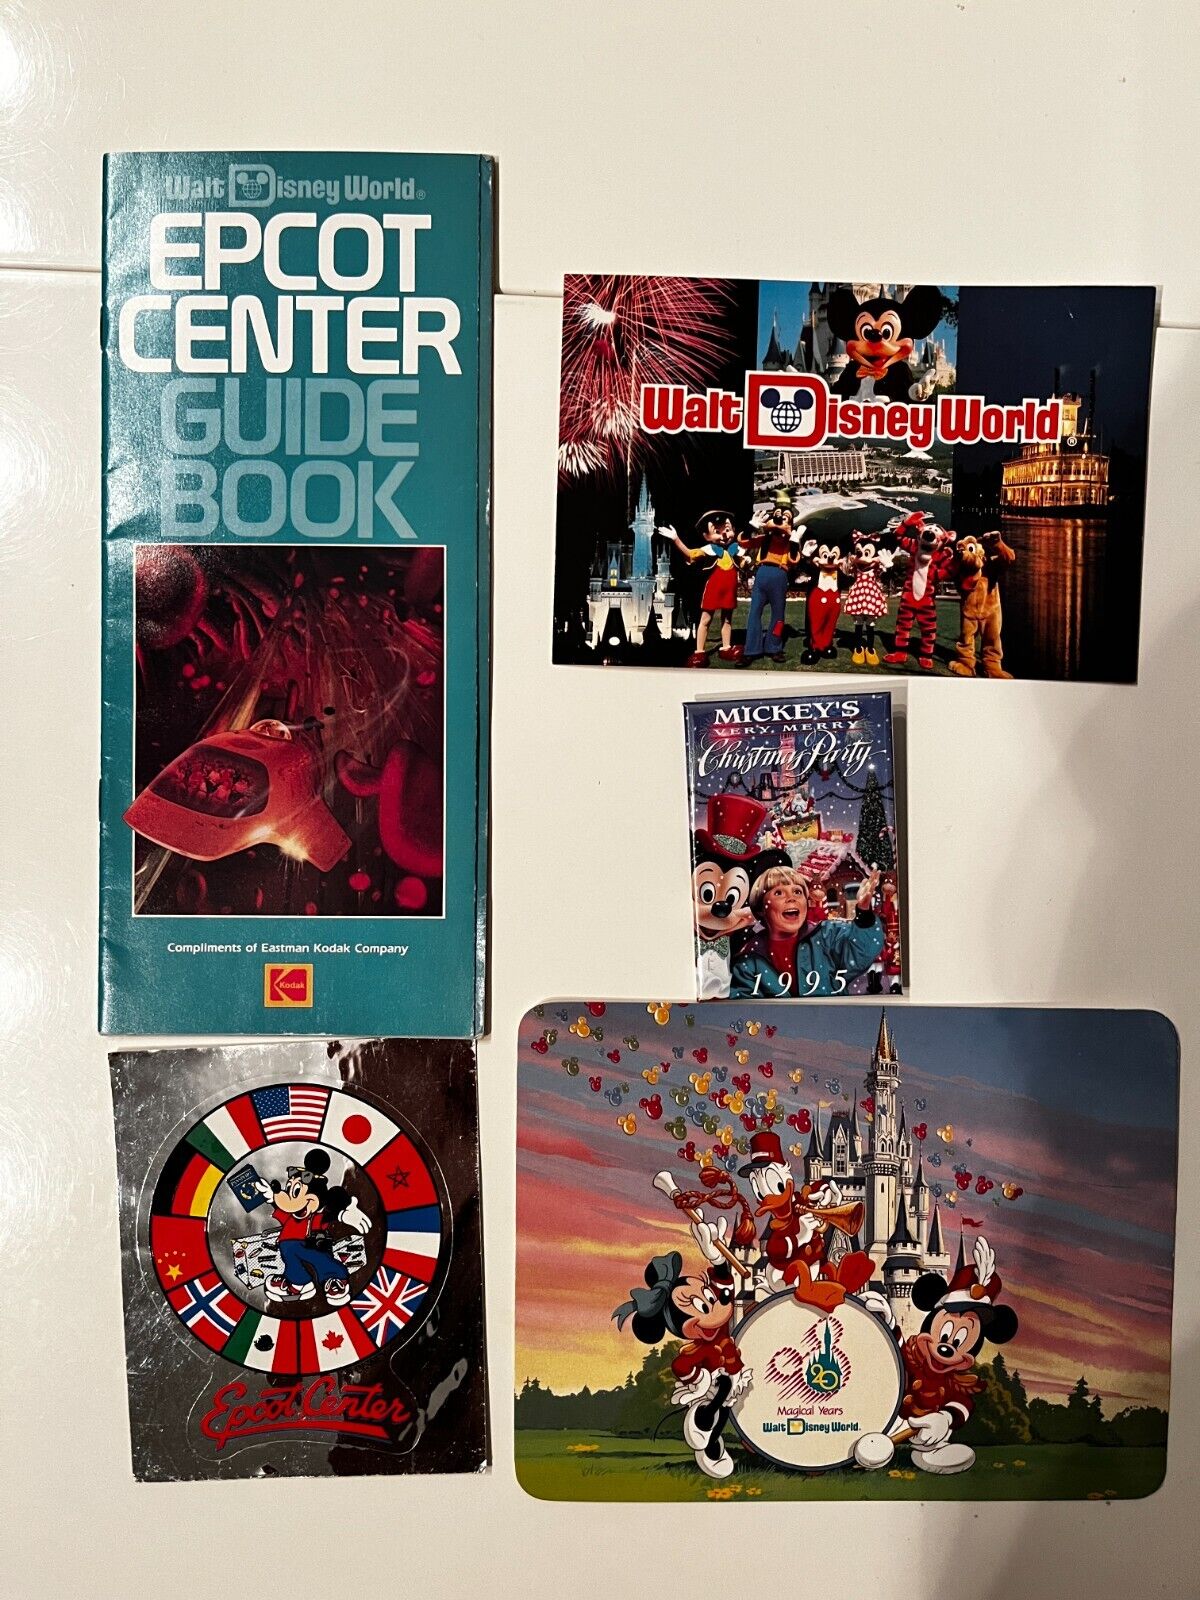 Vintage Disney Items (Brochures, Postcards, Decal and Pin)